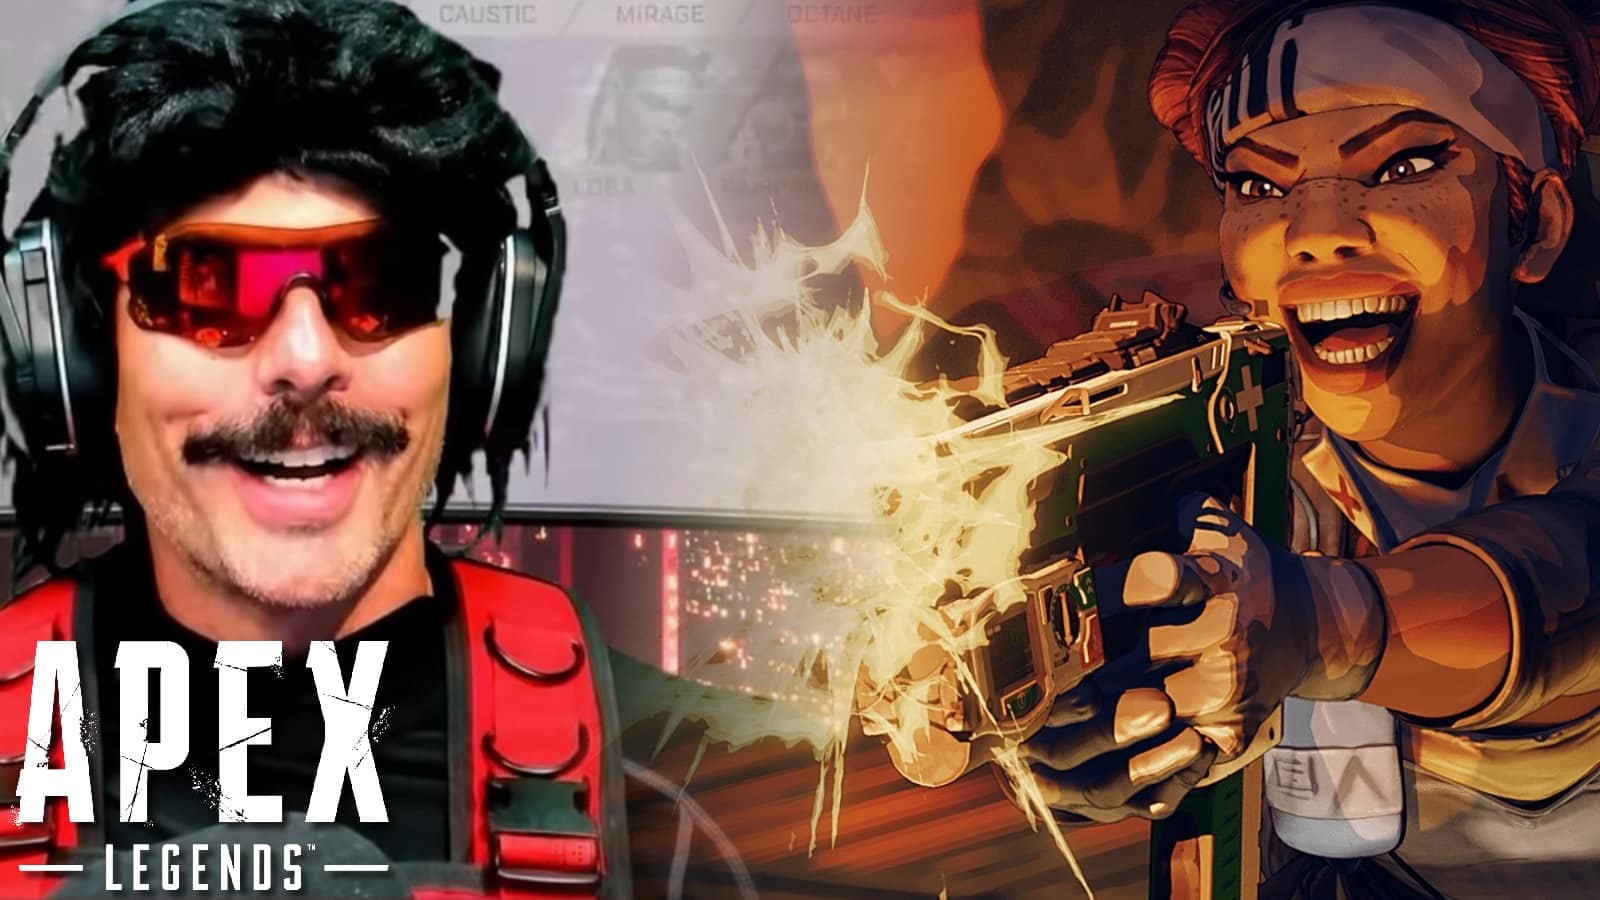 Dr Disrespect Apex Legends Season 10 Emergence Time to Kill Rant YouTube Streamer With Logo